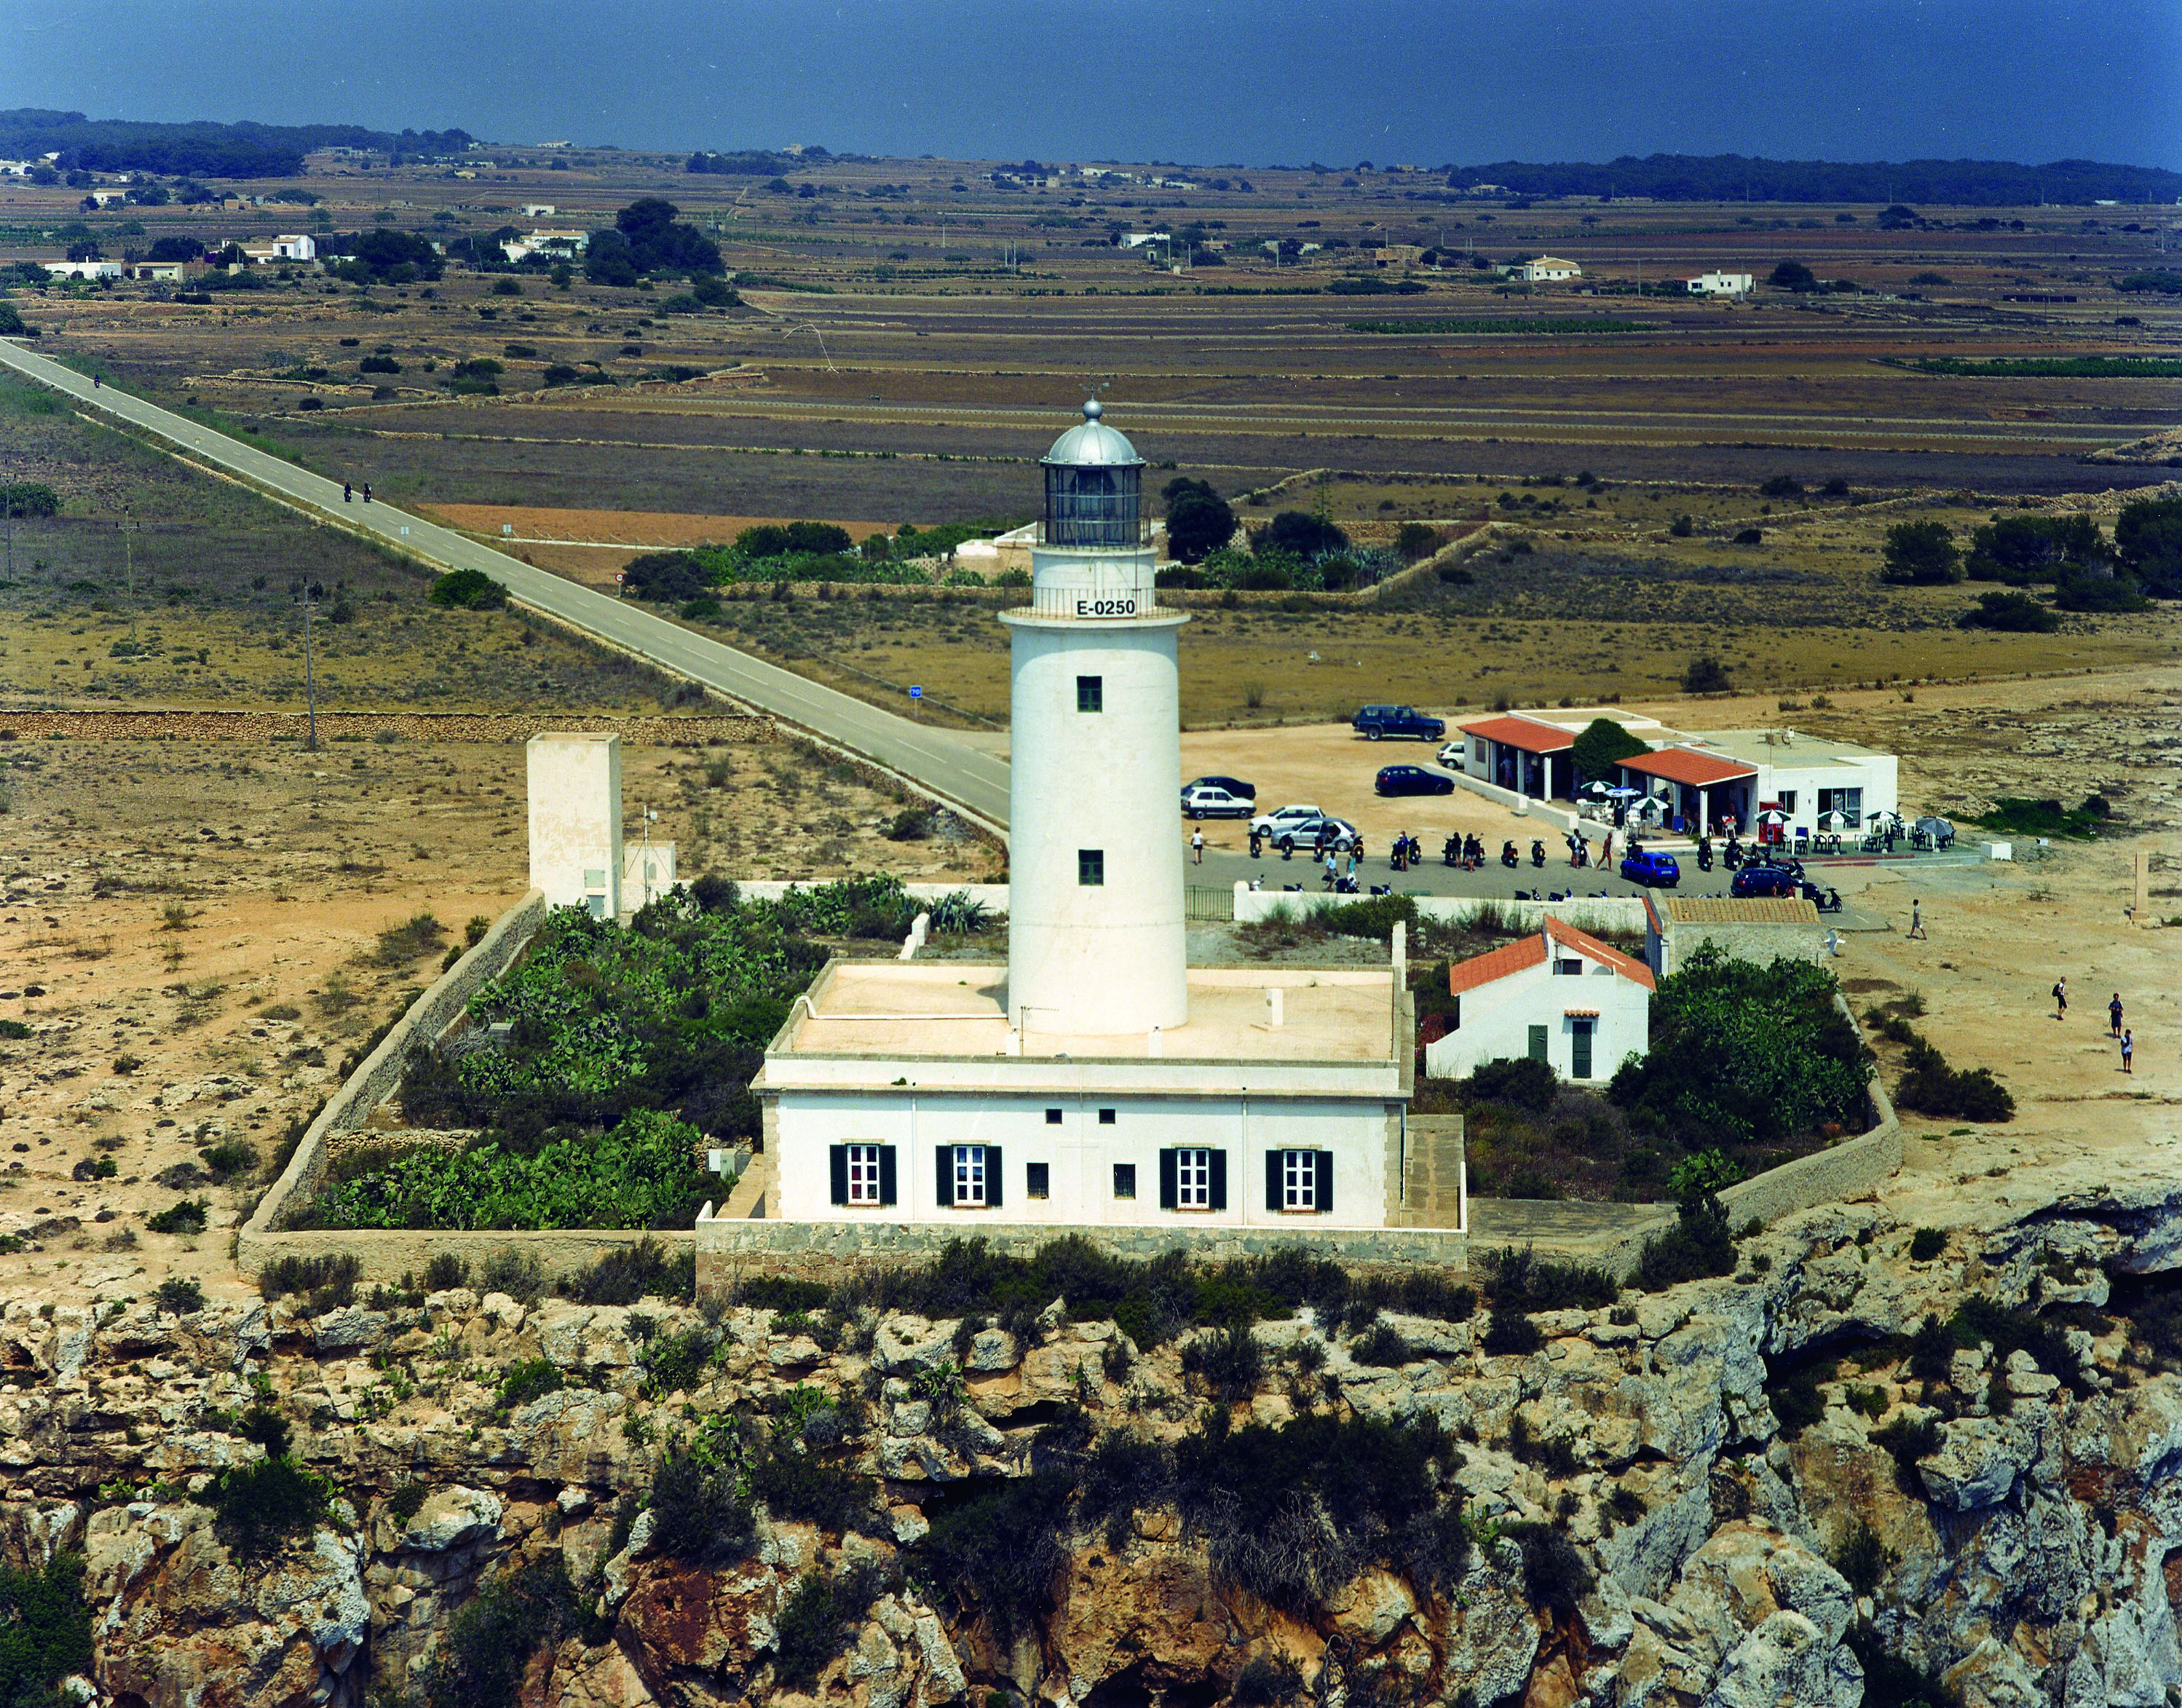 The APB puts running a bar at La Mola Lighthouse in Formentera out to tender 